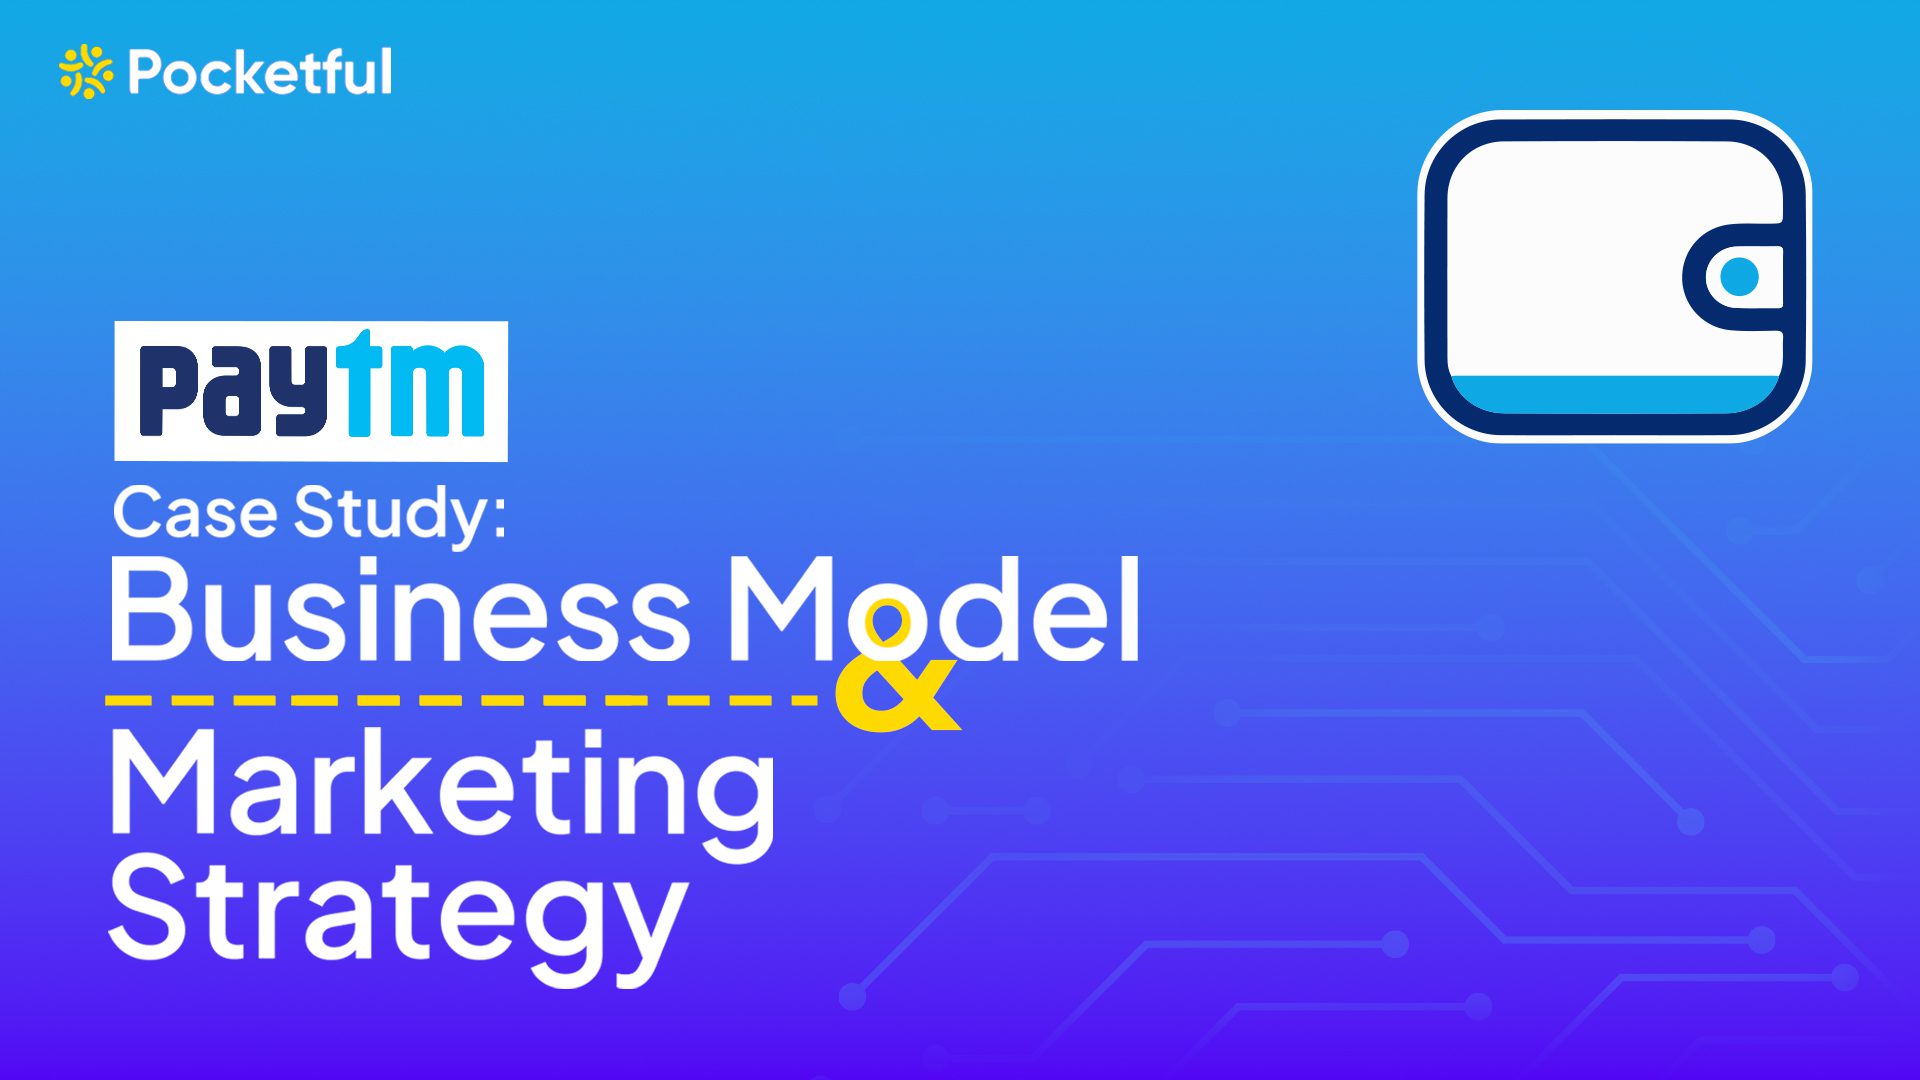 Paytm Case Study: Business Model and Marketing Strategy